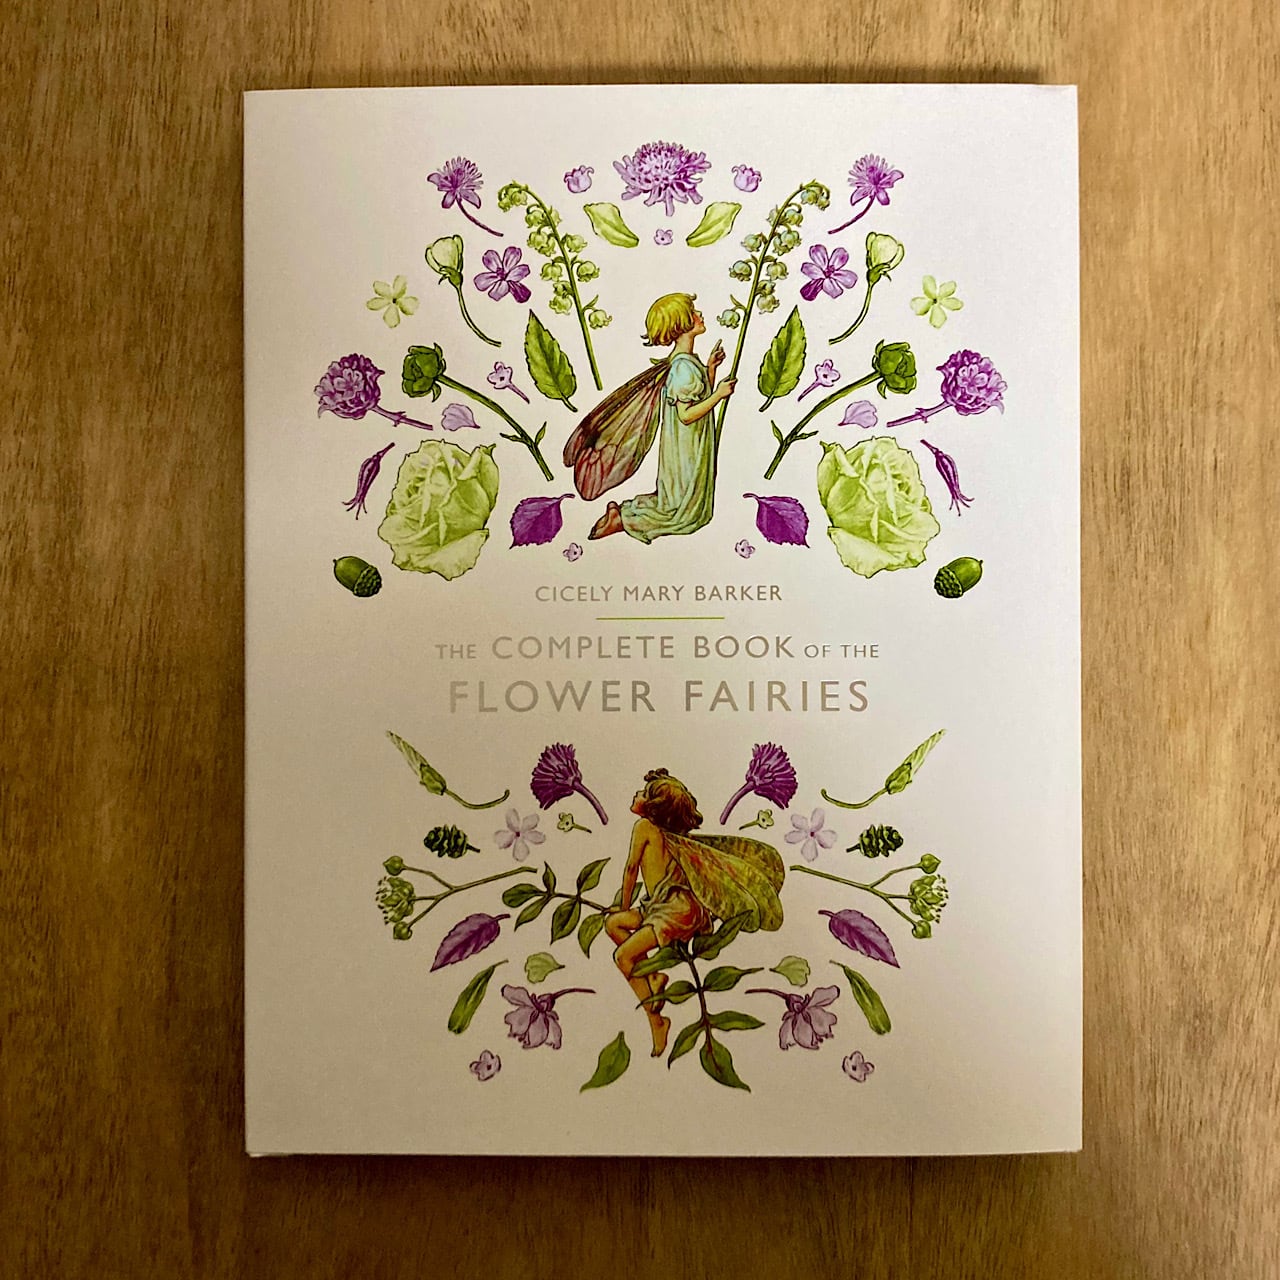 The　Leaf　素敵な洋書の絵本のお店　Flower　the　Complete　Read　Book　of　Fairies　Books